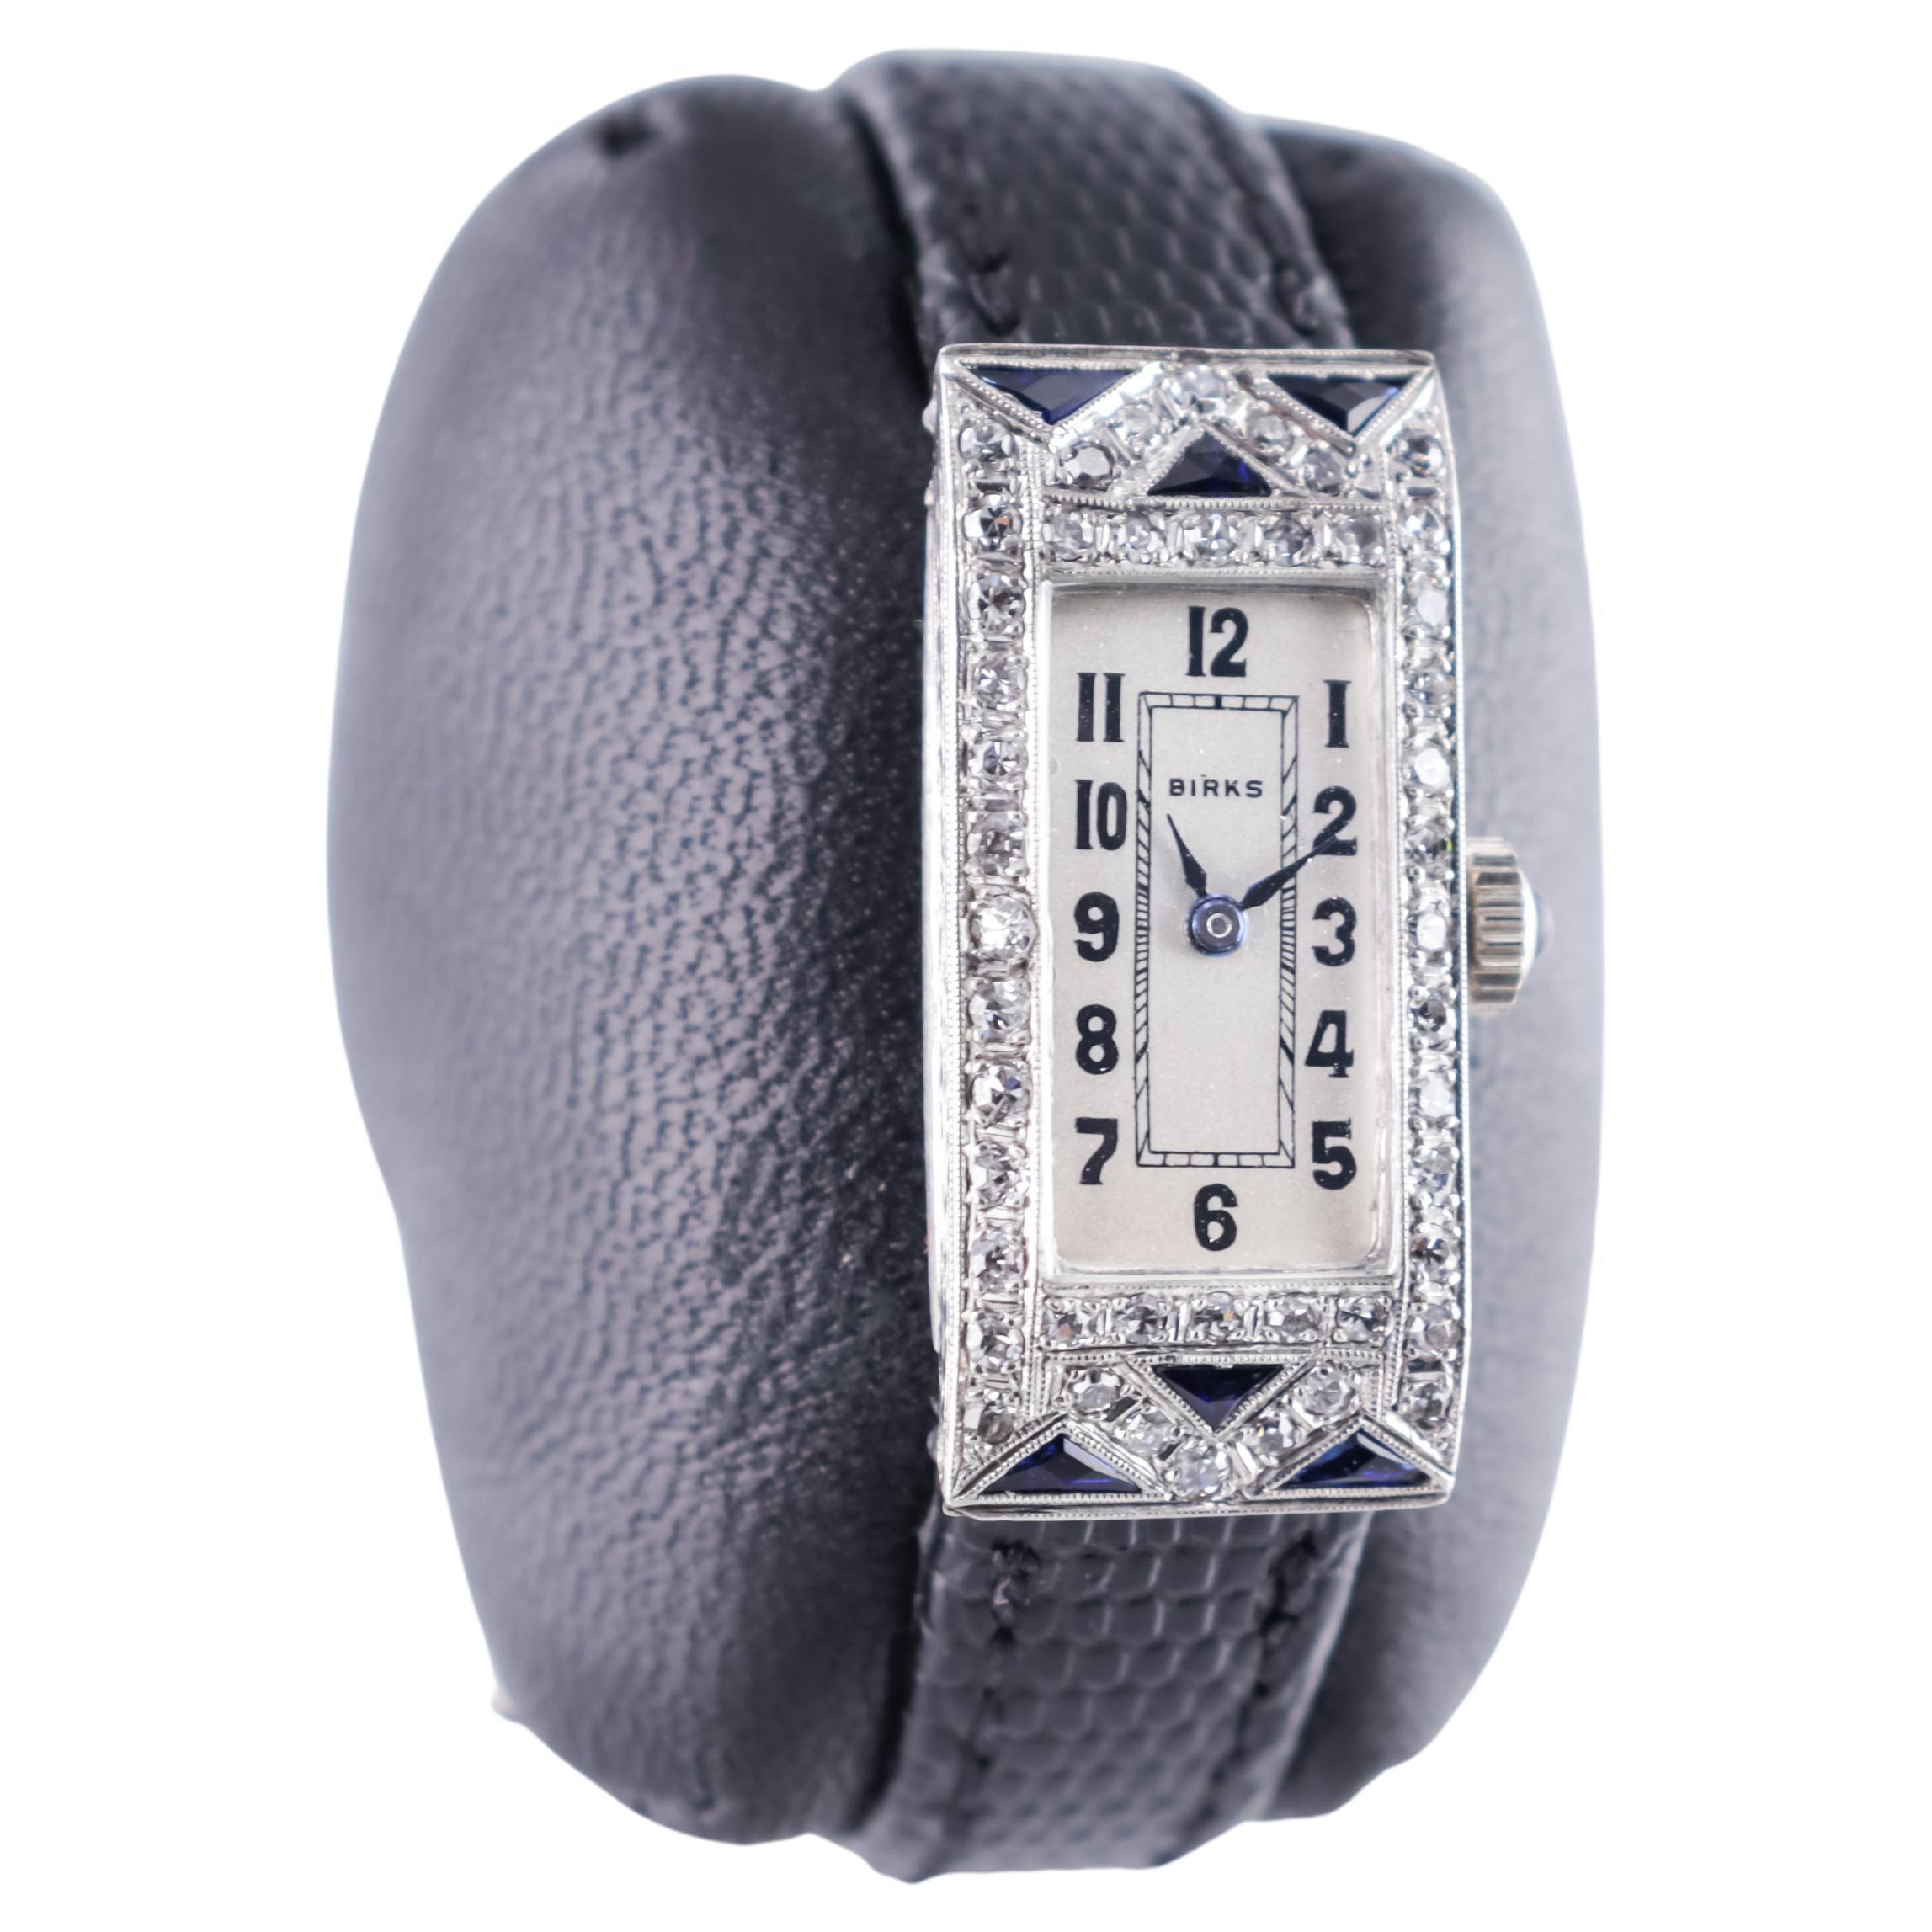 FACTORY / HOUSE: Henry Birks & Sons 
STYLE / REFERENCE: Art Deco Dress Watch
METAL / MATERIAL: Platinum Diamond and Sapphire
CIRCA / YEAR: 1940's
DIMENSIONS / SIZE: 32 Length X 15 Width
MOVEMENT / CALIBER:  Manual Winding / 17 Jewels 
DIAL / HANDS: 